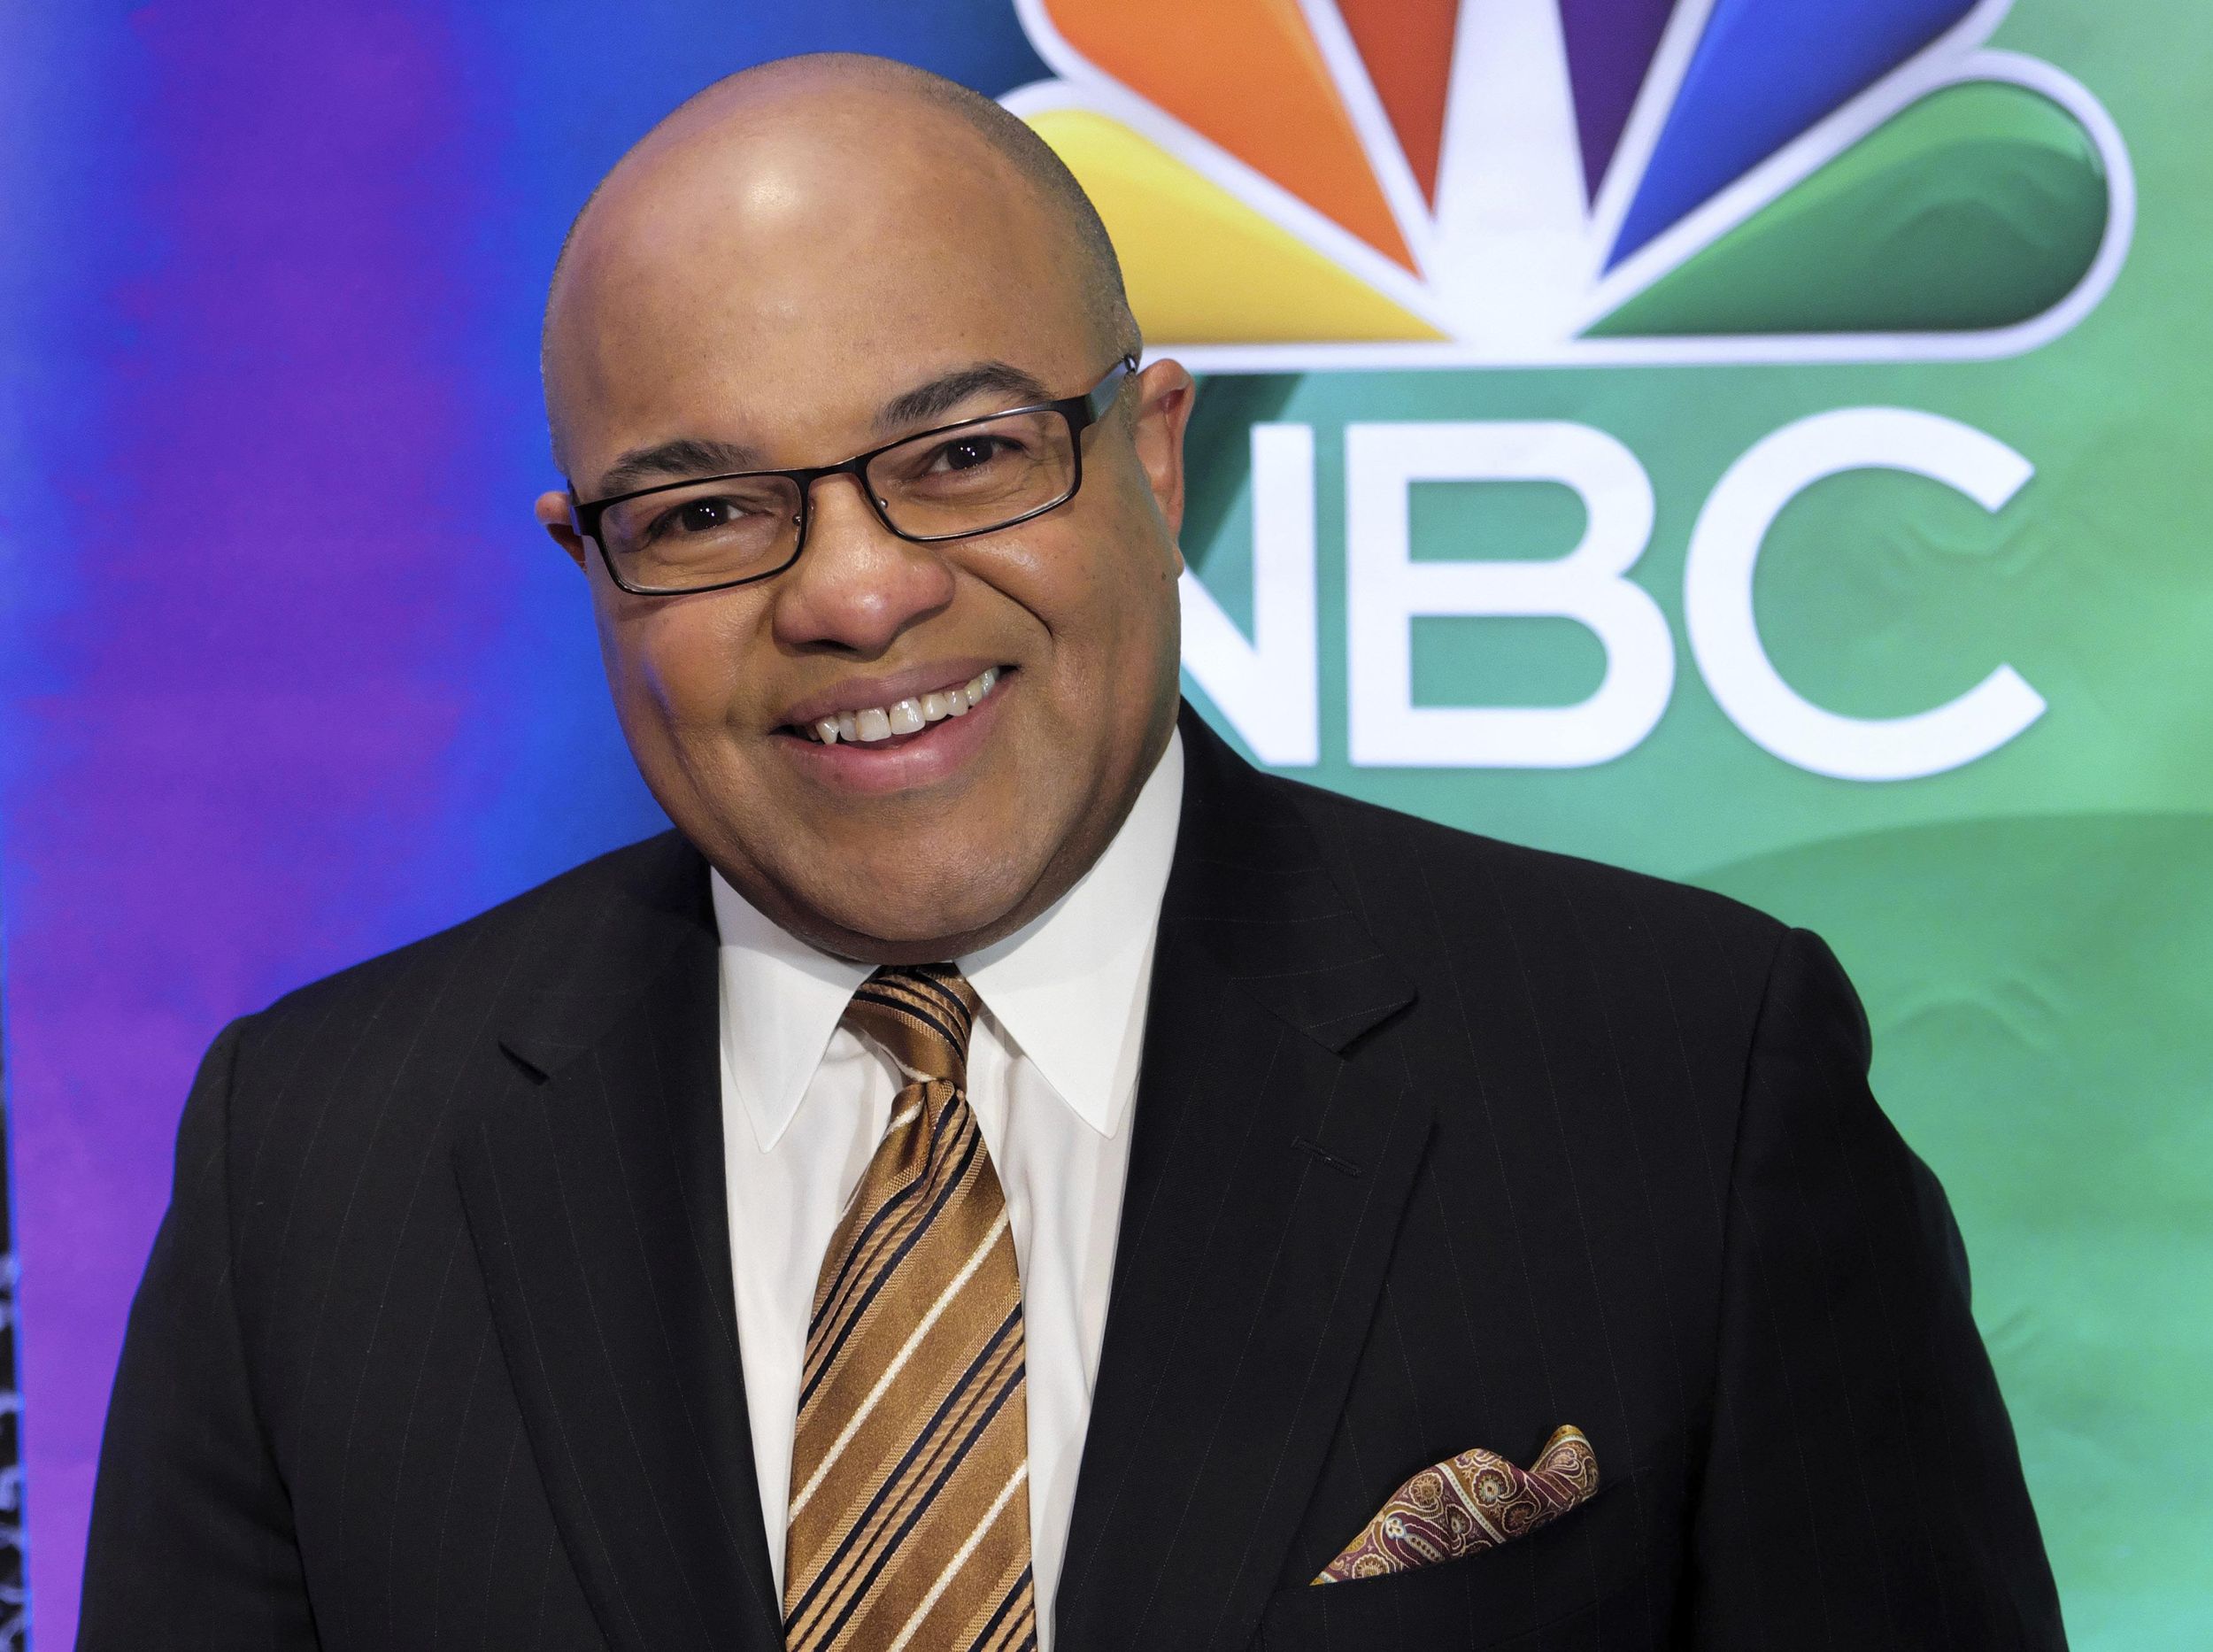 Mike Tirico to be playbyplay announcer for Notre Dame on NBC The